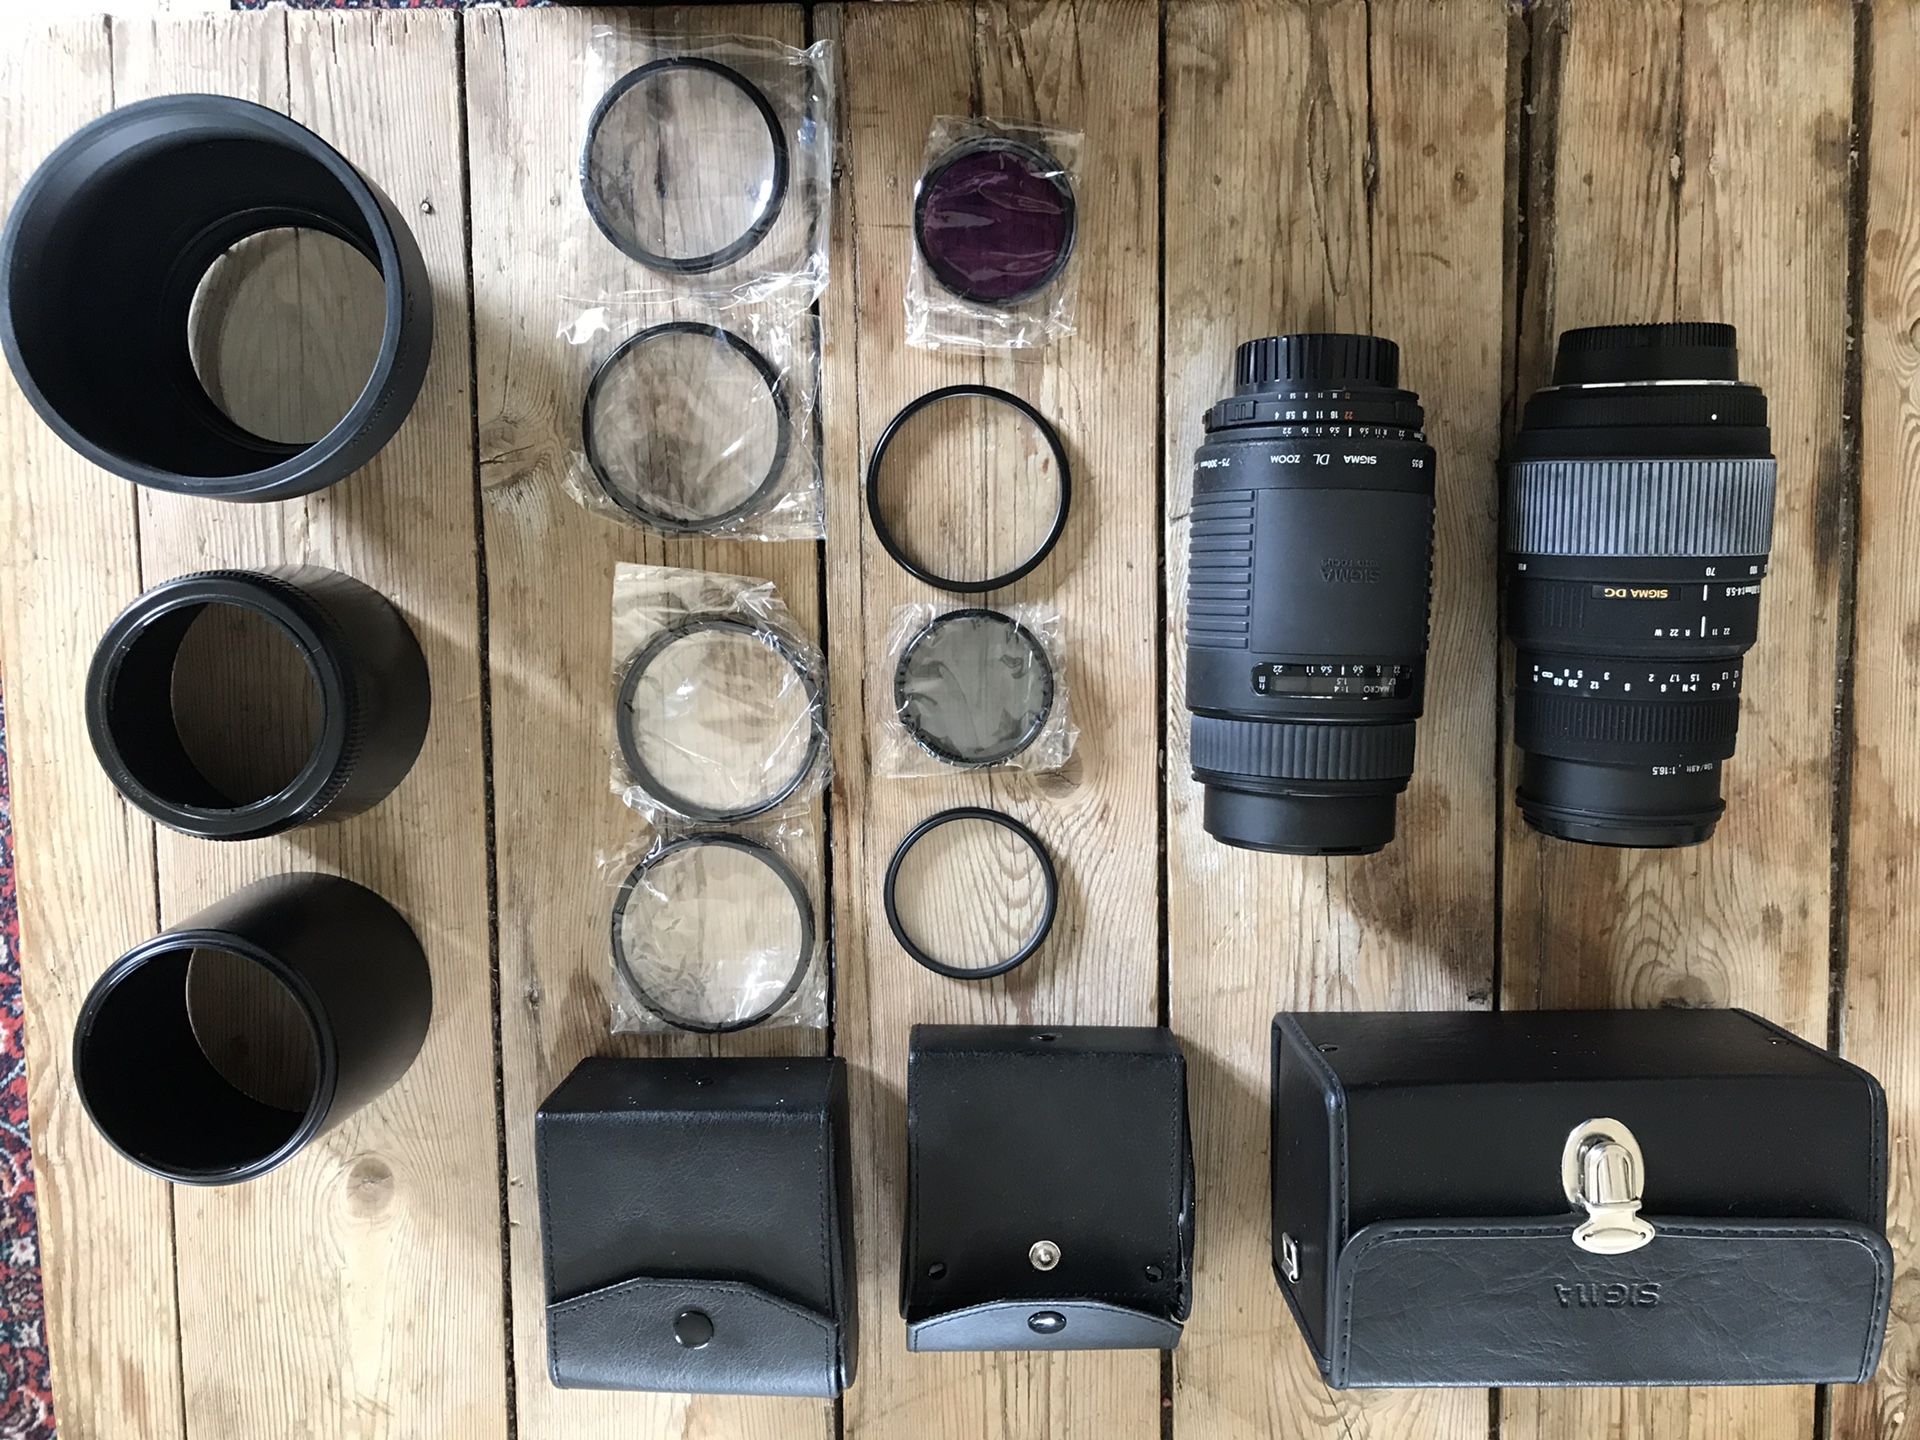 Nikon mount Sigma zoom lenses with UV filters and Lens Hoods